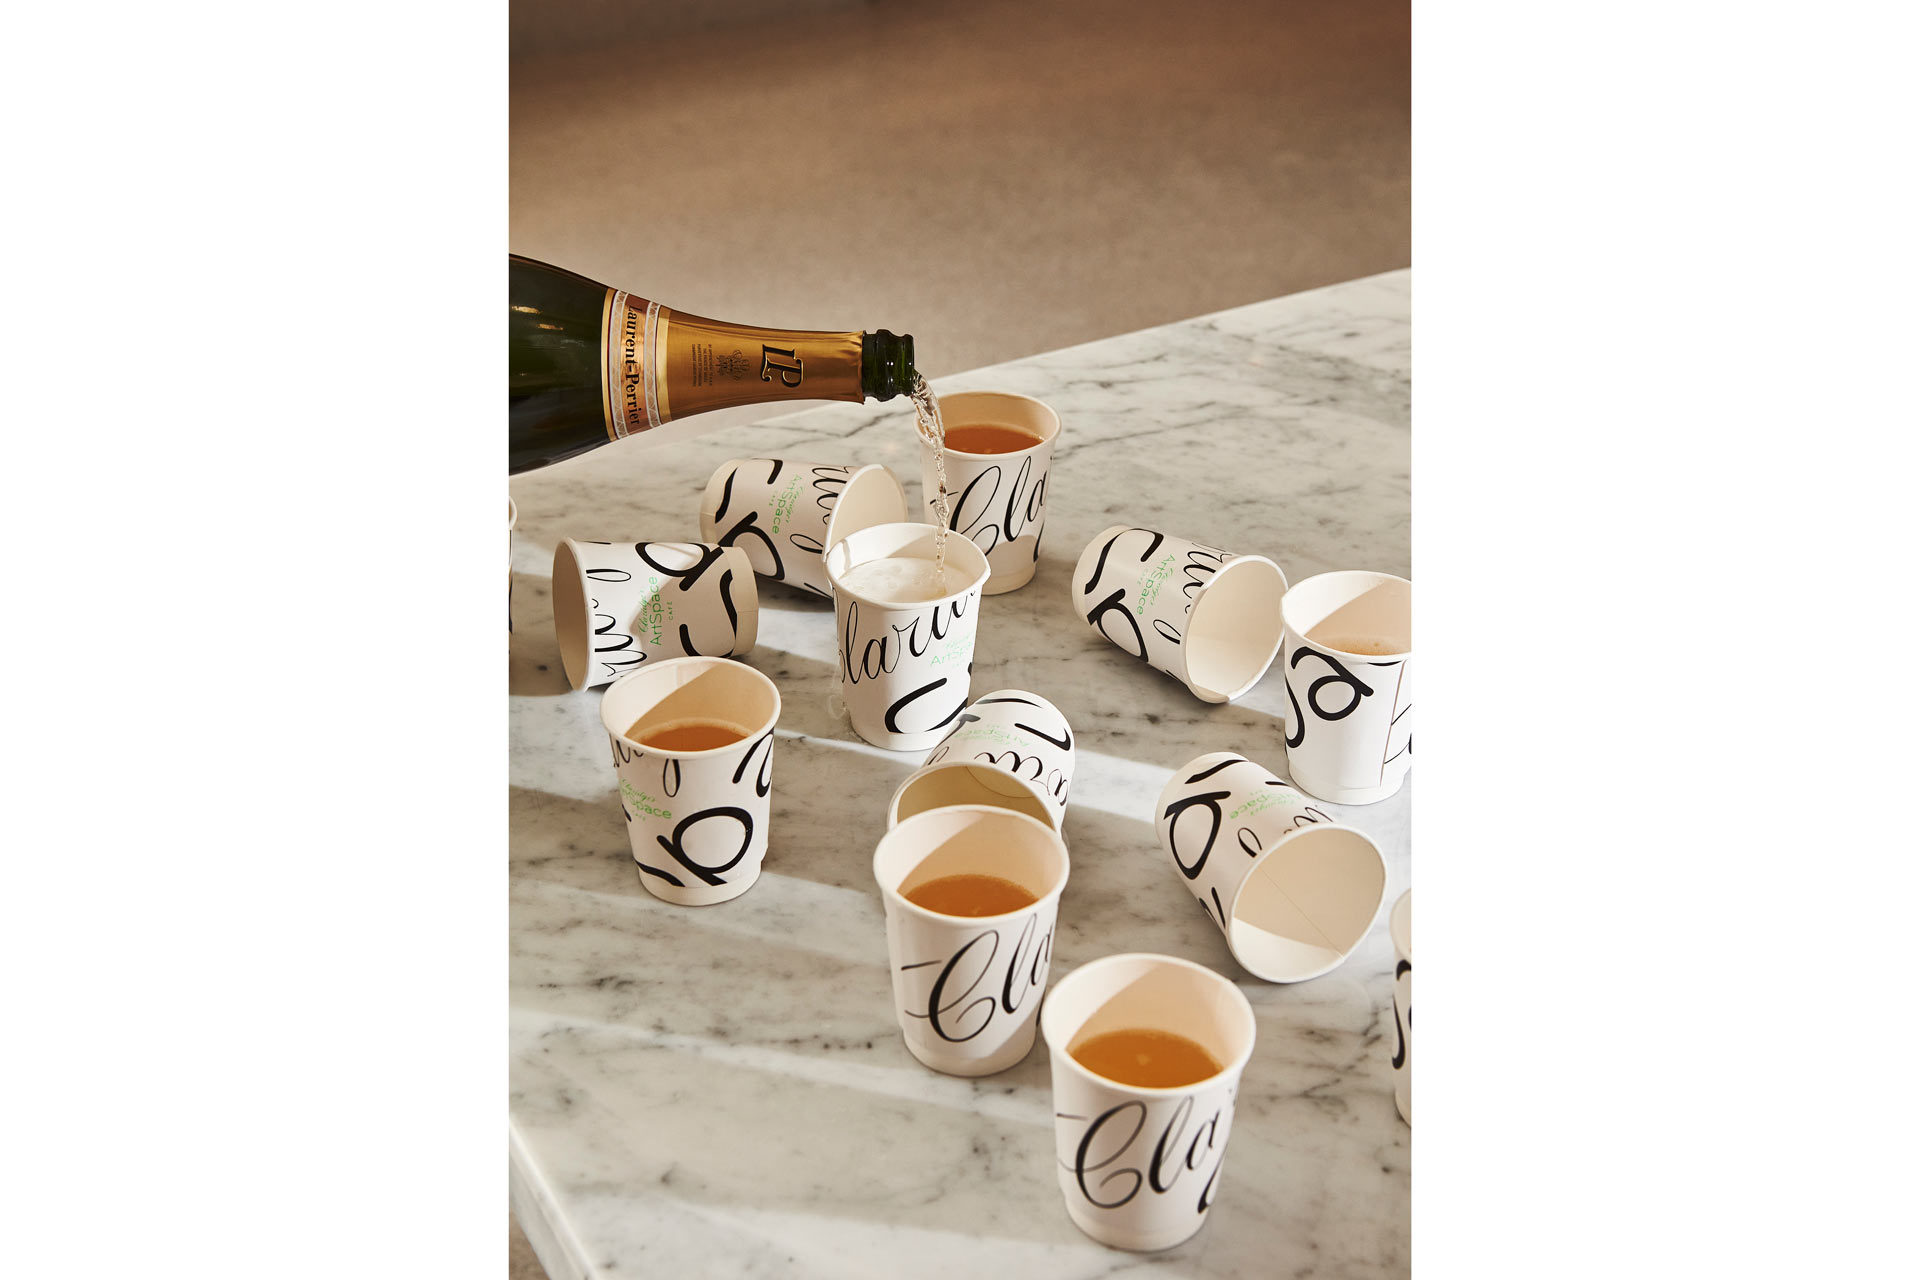 Champagne served in takeaway cups at Claridge's